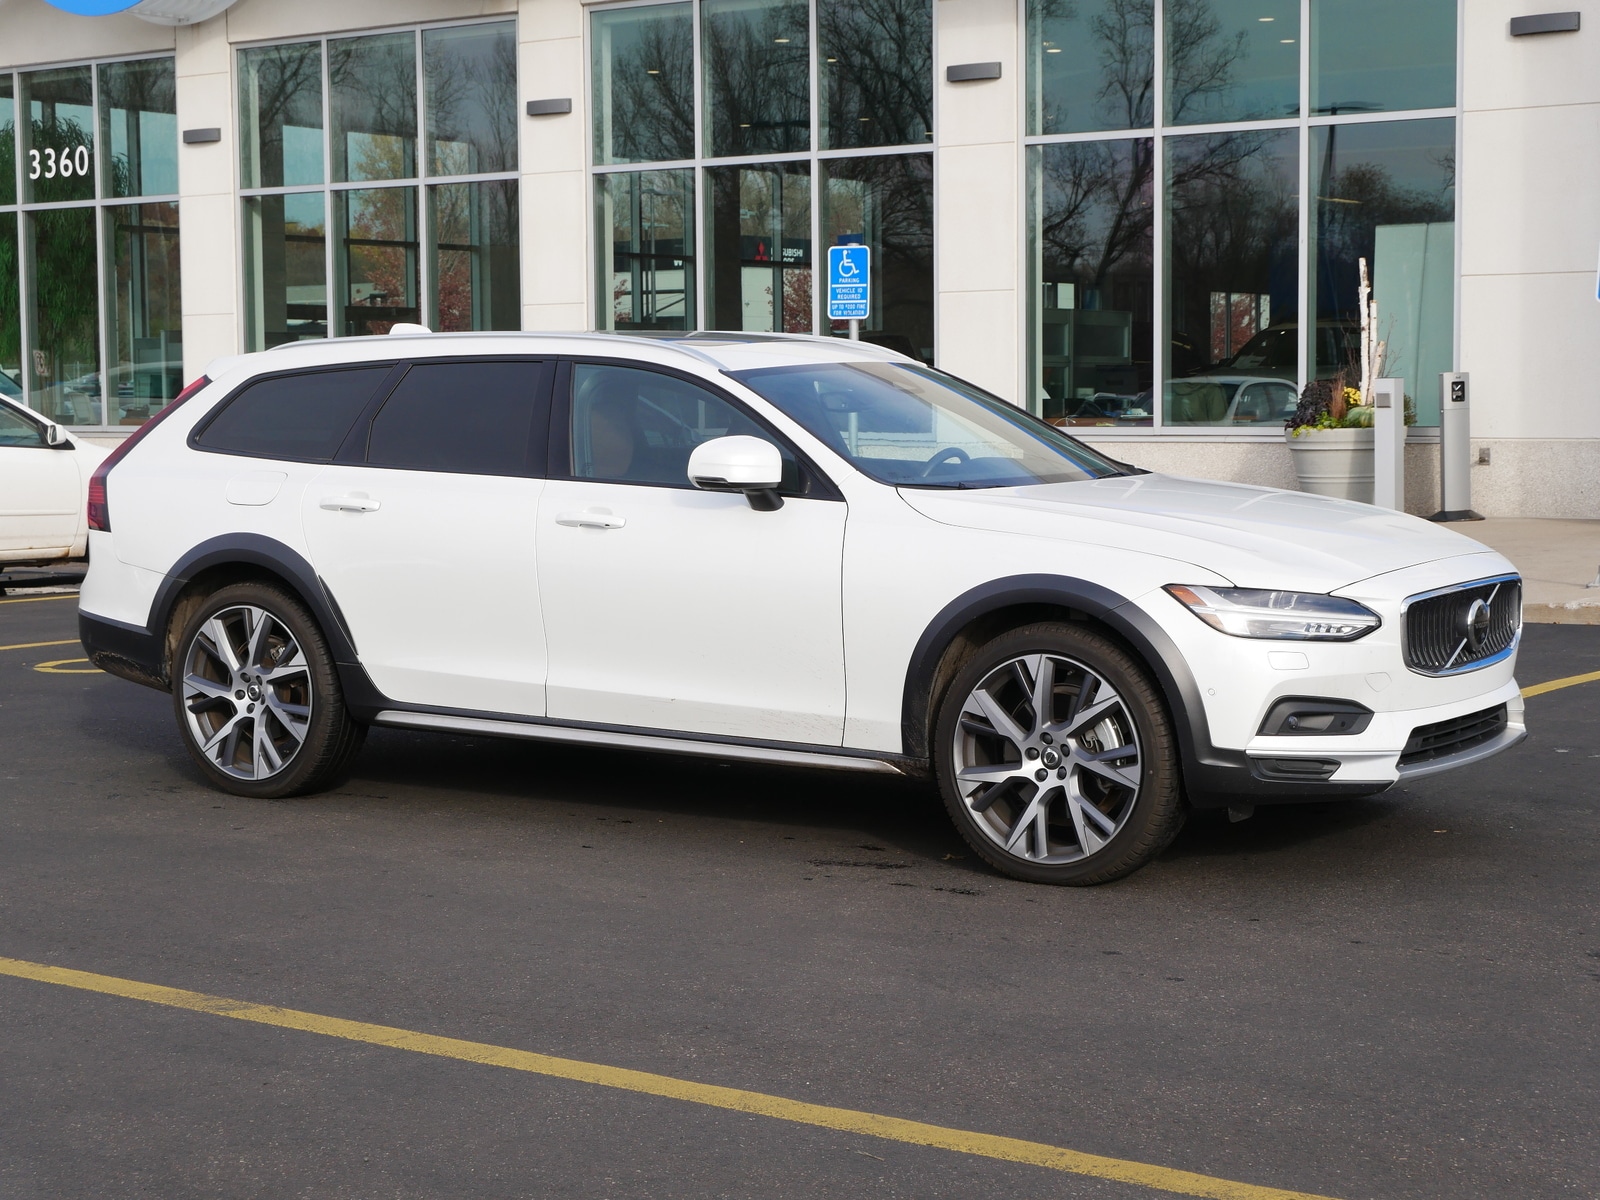 2022 Volvo V90 Cross Country B6 First Test: The Least-Electrified Volvo